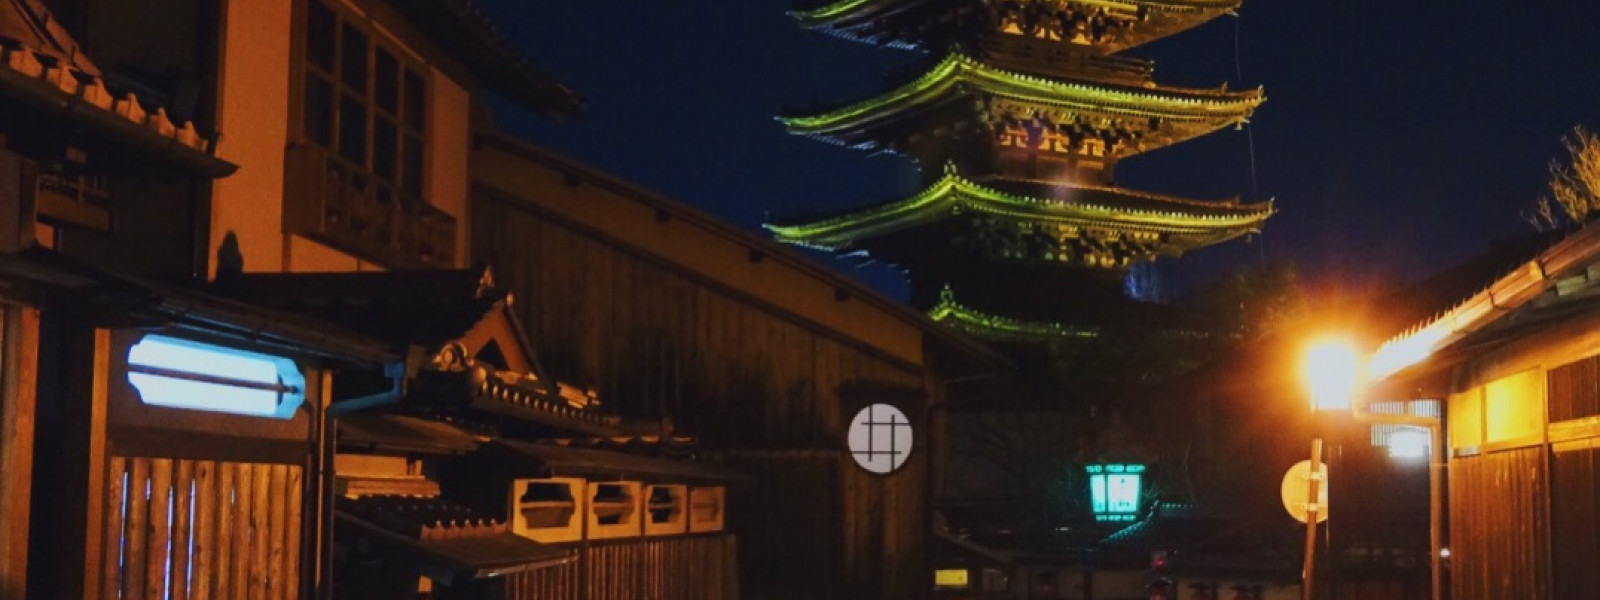 Night photo of the Yasaka tower and a Kyoto street with traditional wooden buildings